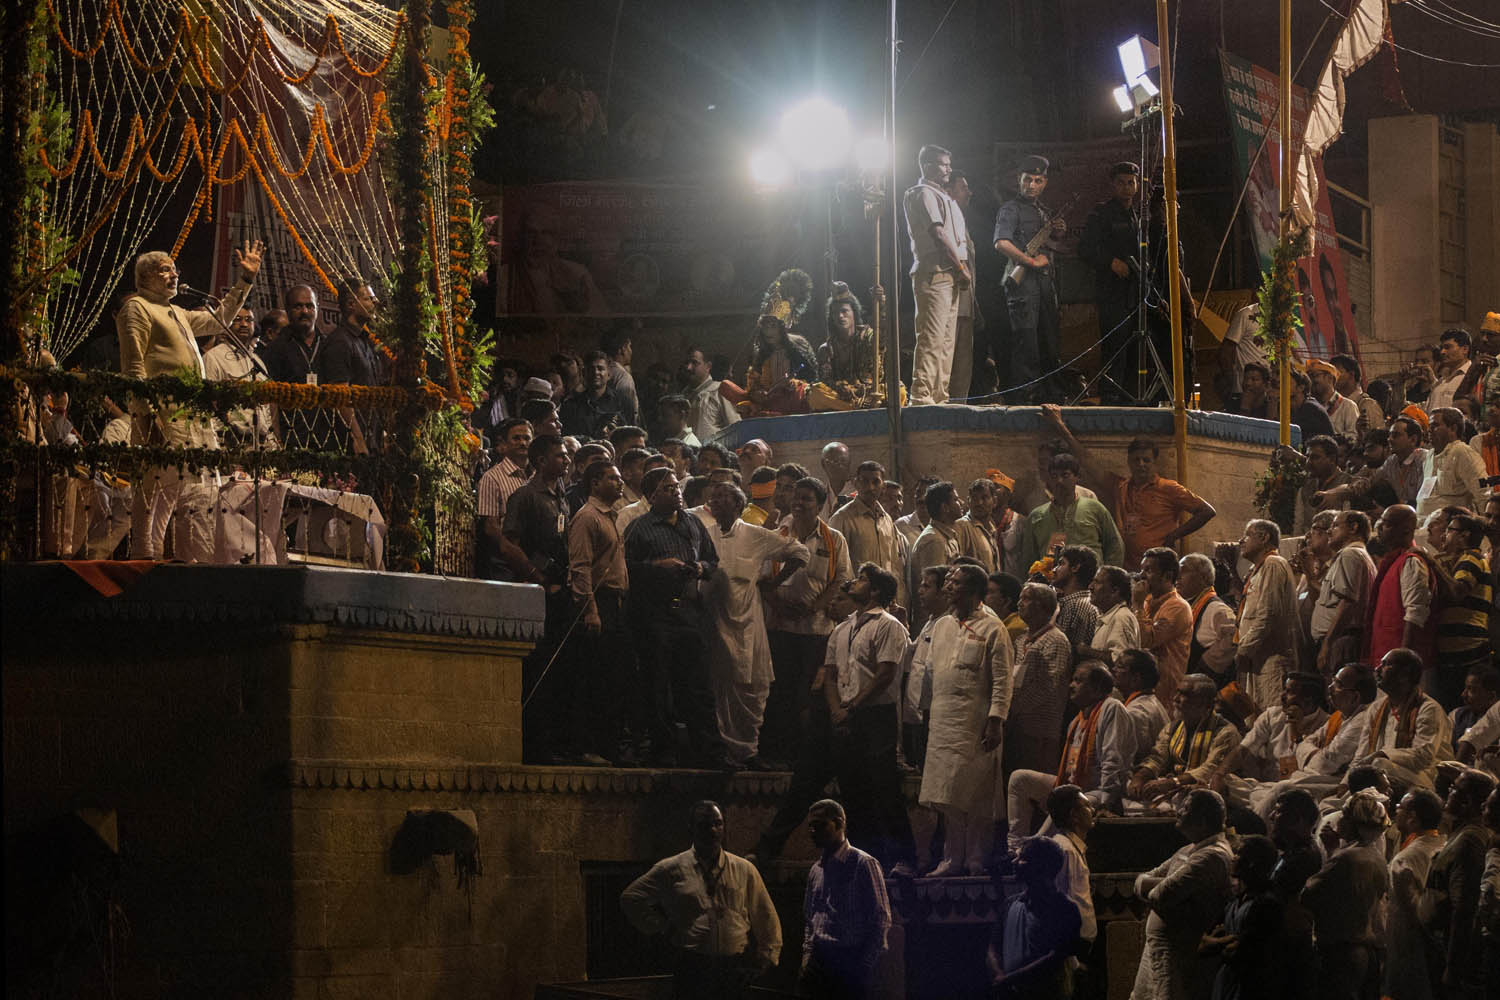 BJP leader Narendra Modi Prays At The Famous Dashaswamadeh Ghat On The Ganges River